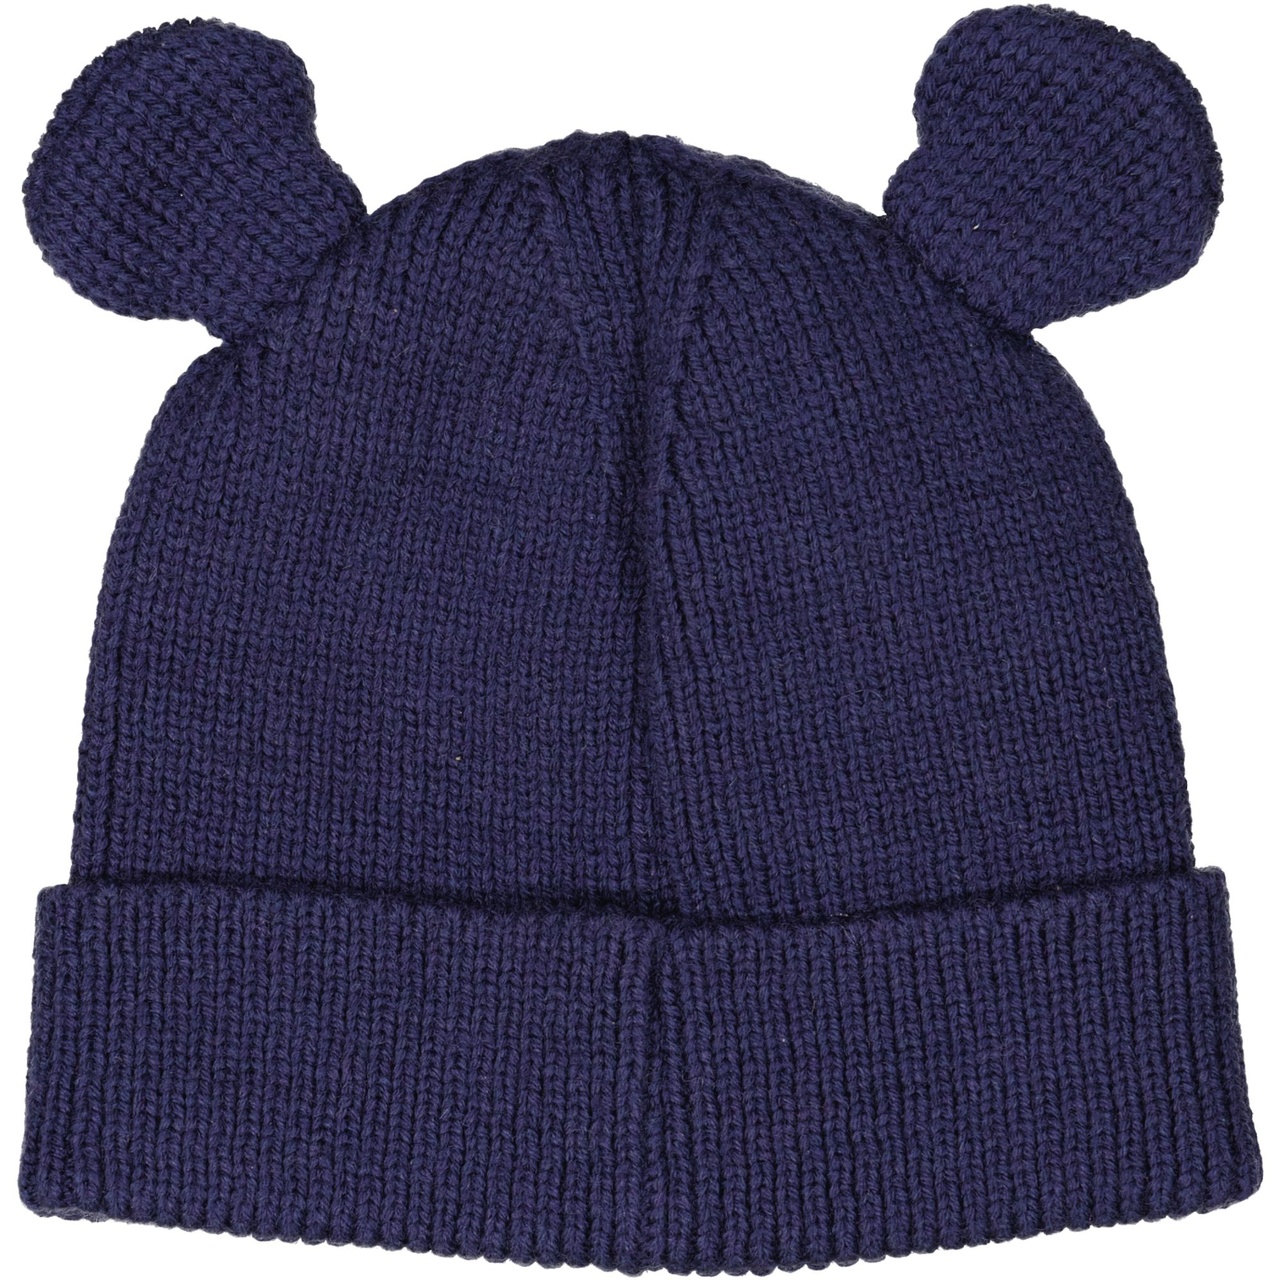 Knitted beanie ears Navy  2-6Y